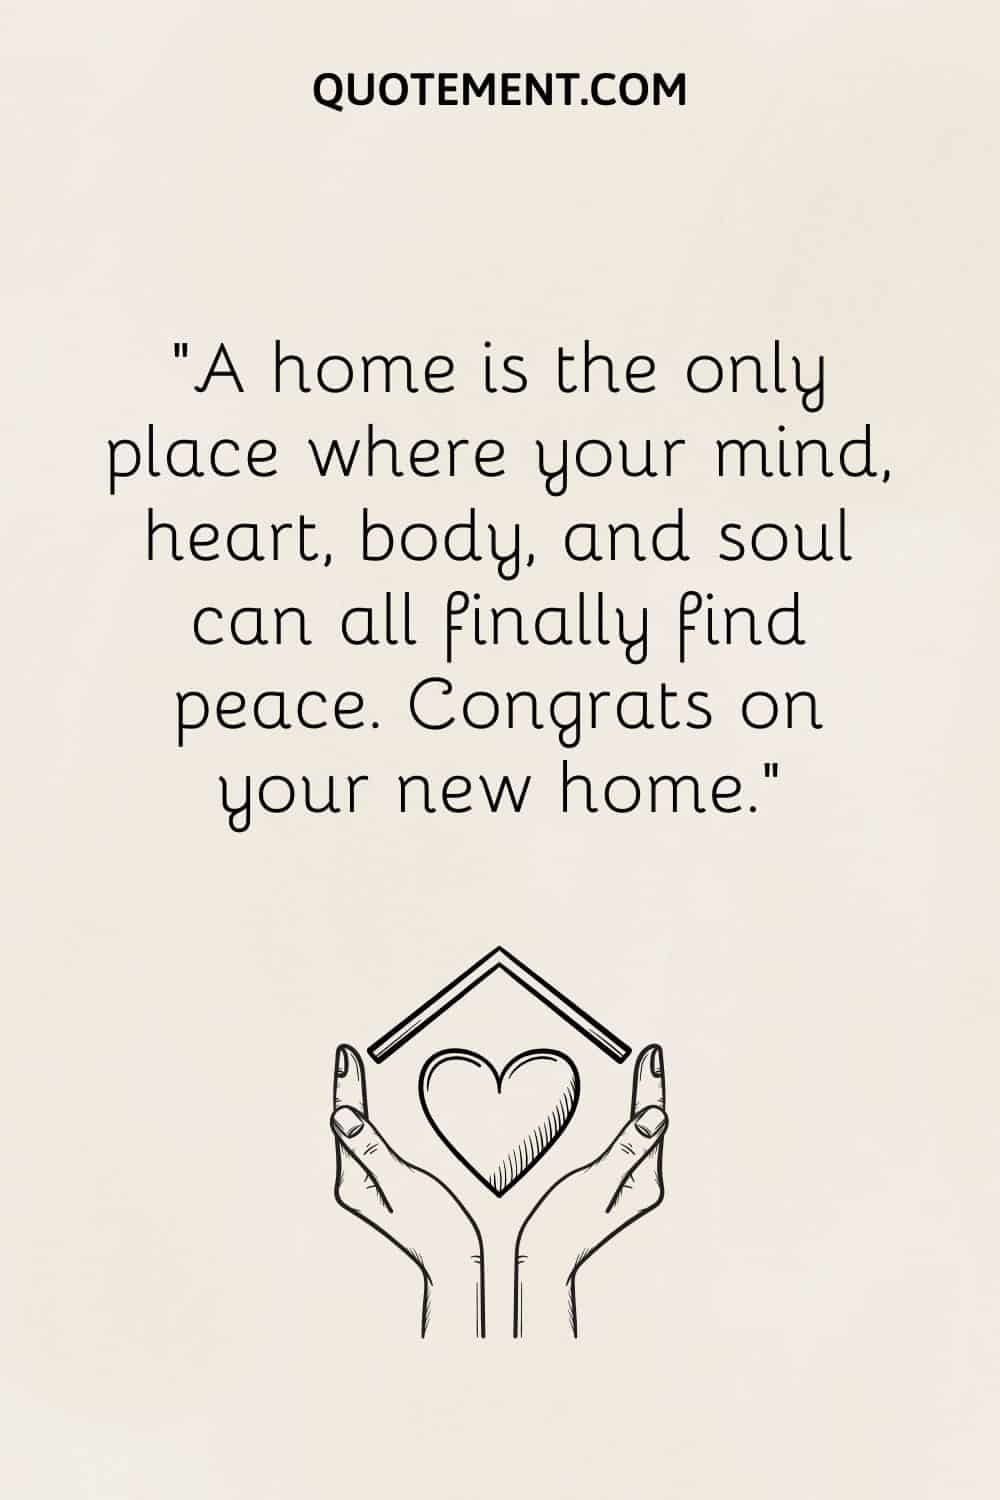 A home is the only place where your mind, heart, body, and soul can all finally find peace